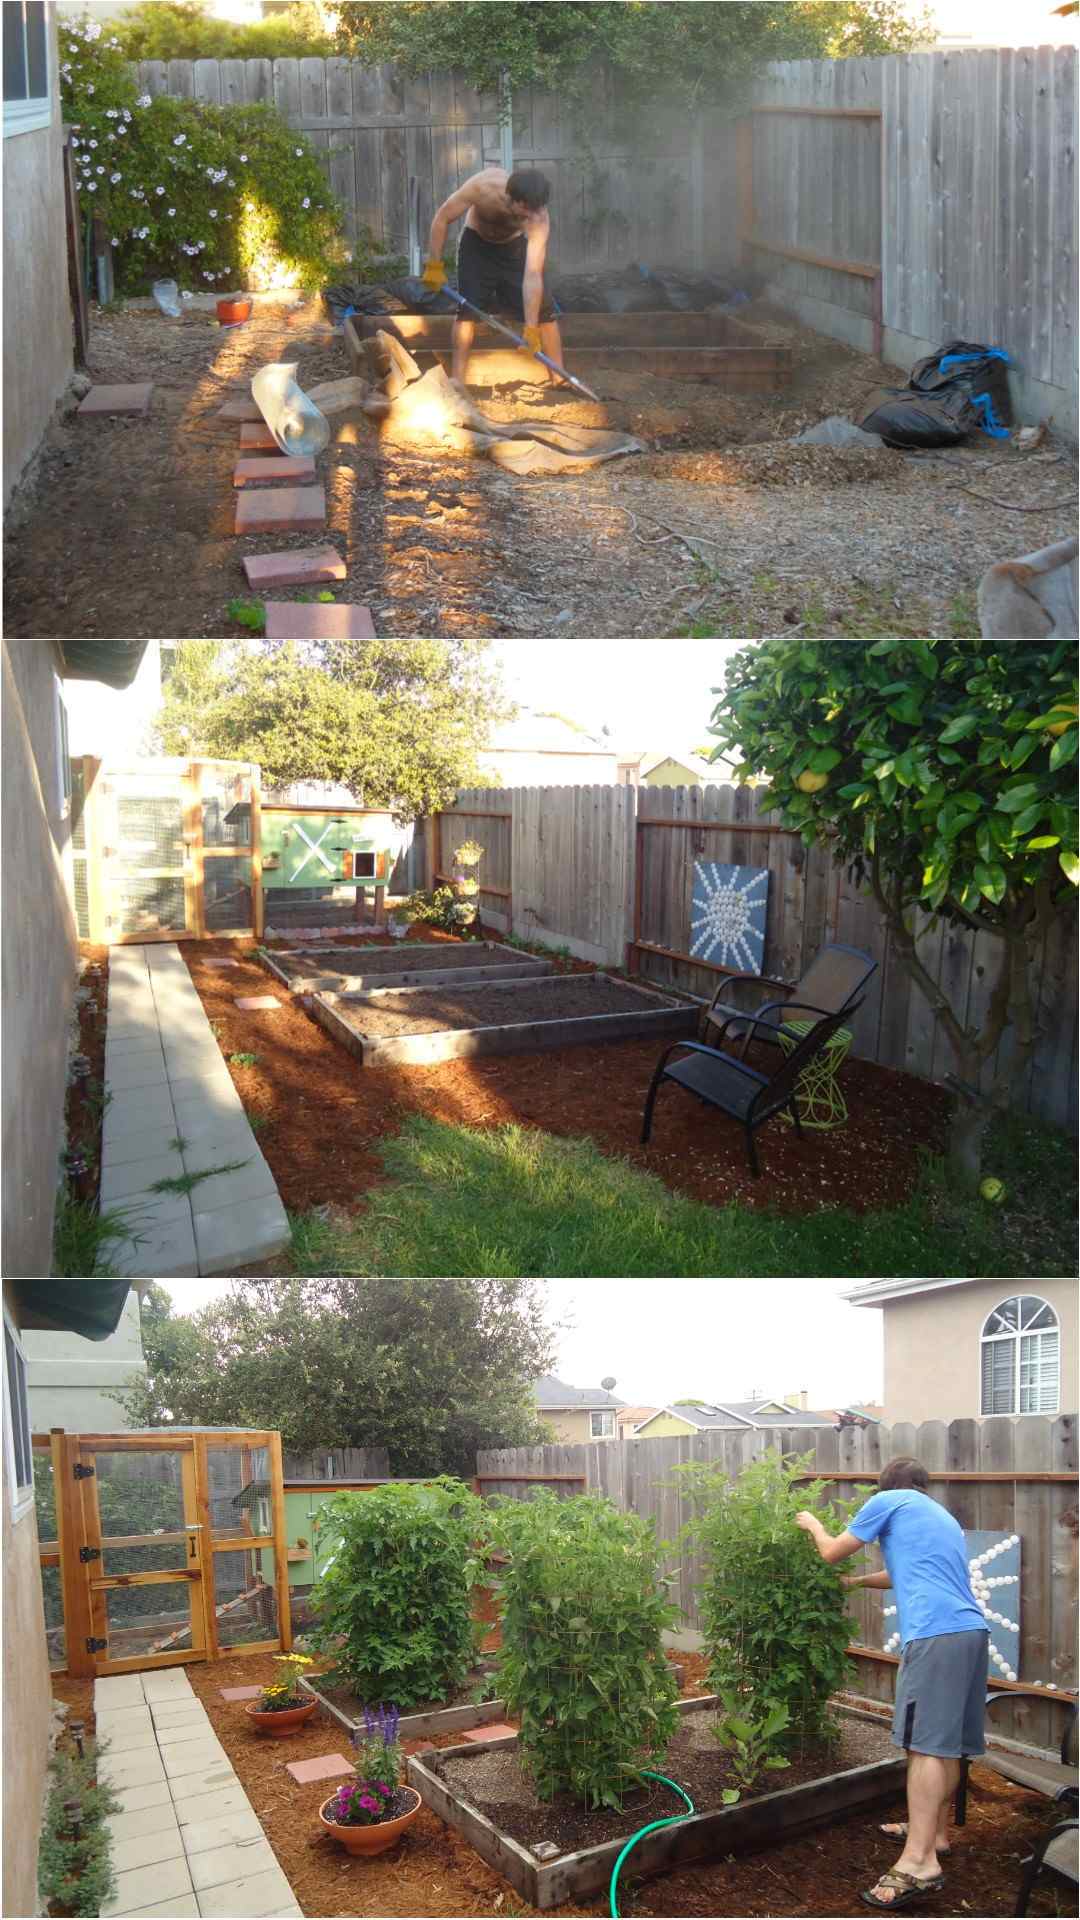 A three part image collage of the process of starting the original coop garden. The first image shows Aaron digging out a place for the garden beds in the ground. There is not coop or chickens yet. The second image shows the coop garden after the chicken coop and run have been built. The garden beds are shown full of soil but devoid of plants. There are two adirondack chairs nearby for relaxing and enjoying the space. The third image shows the same space after tomatoes have been planted out and have grown for multiple months. Aaron is inspecting one of the tomato plants which is almost as tall as him. 